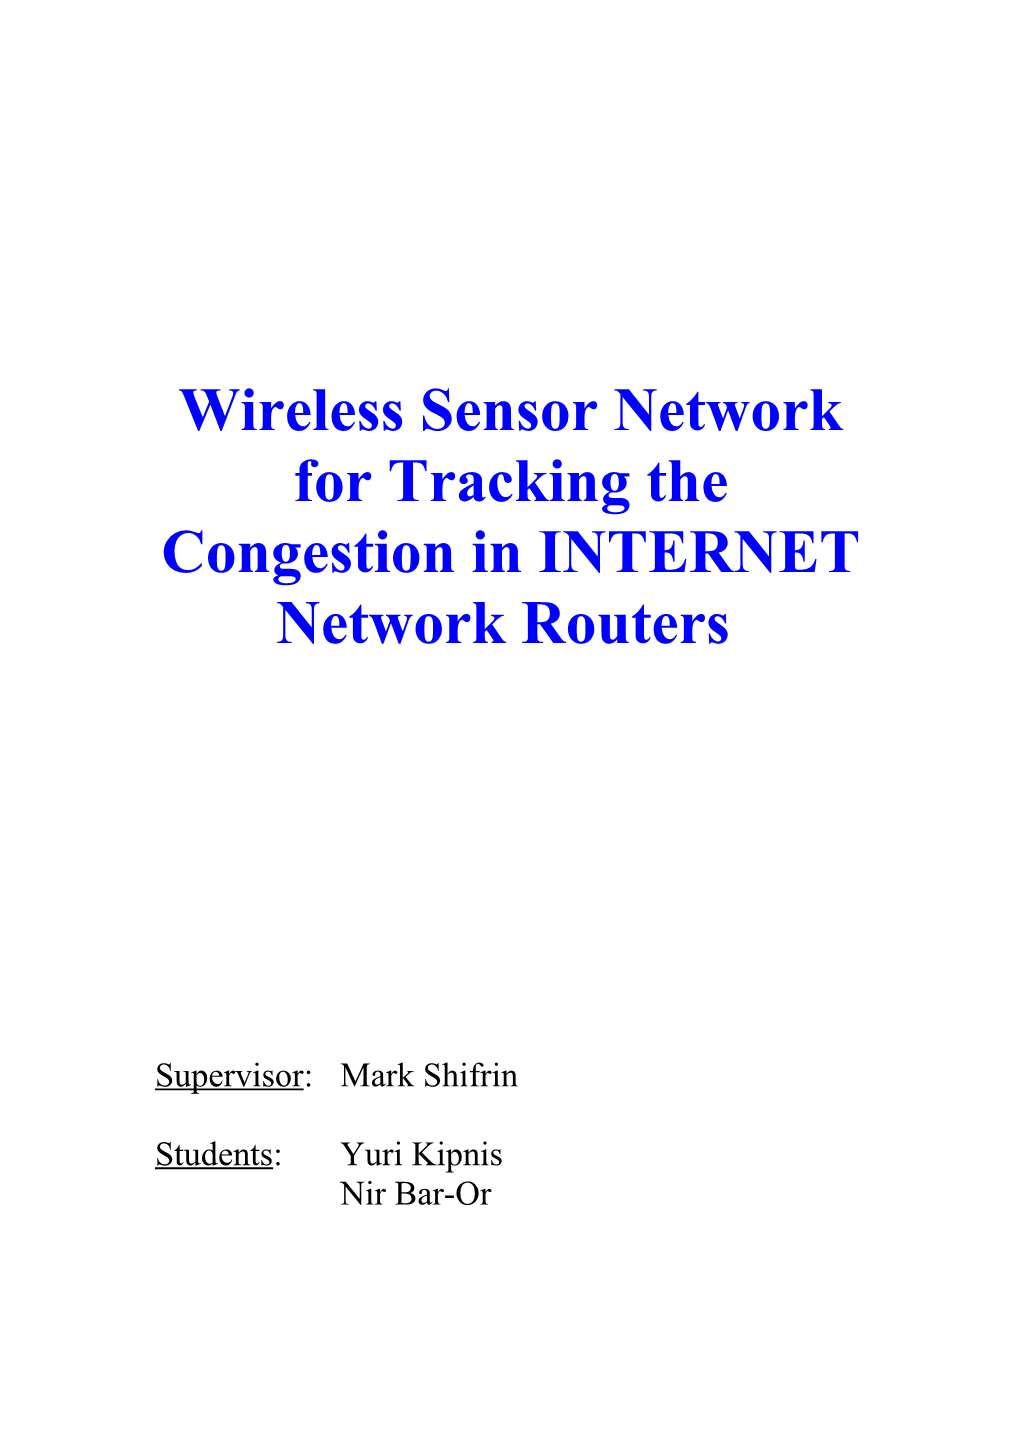 Wireless Sensor Network for Tracking the Congestion in INTERNET Network Routers